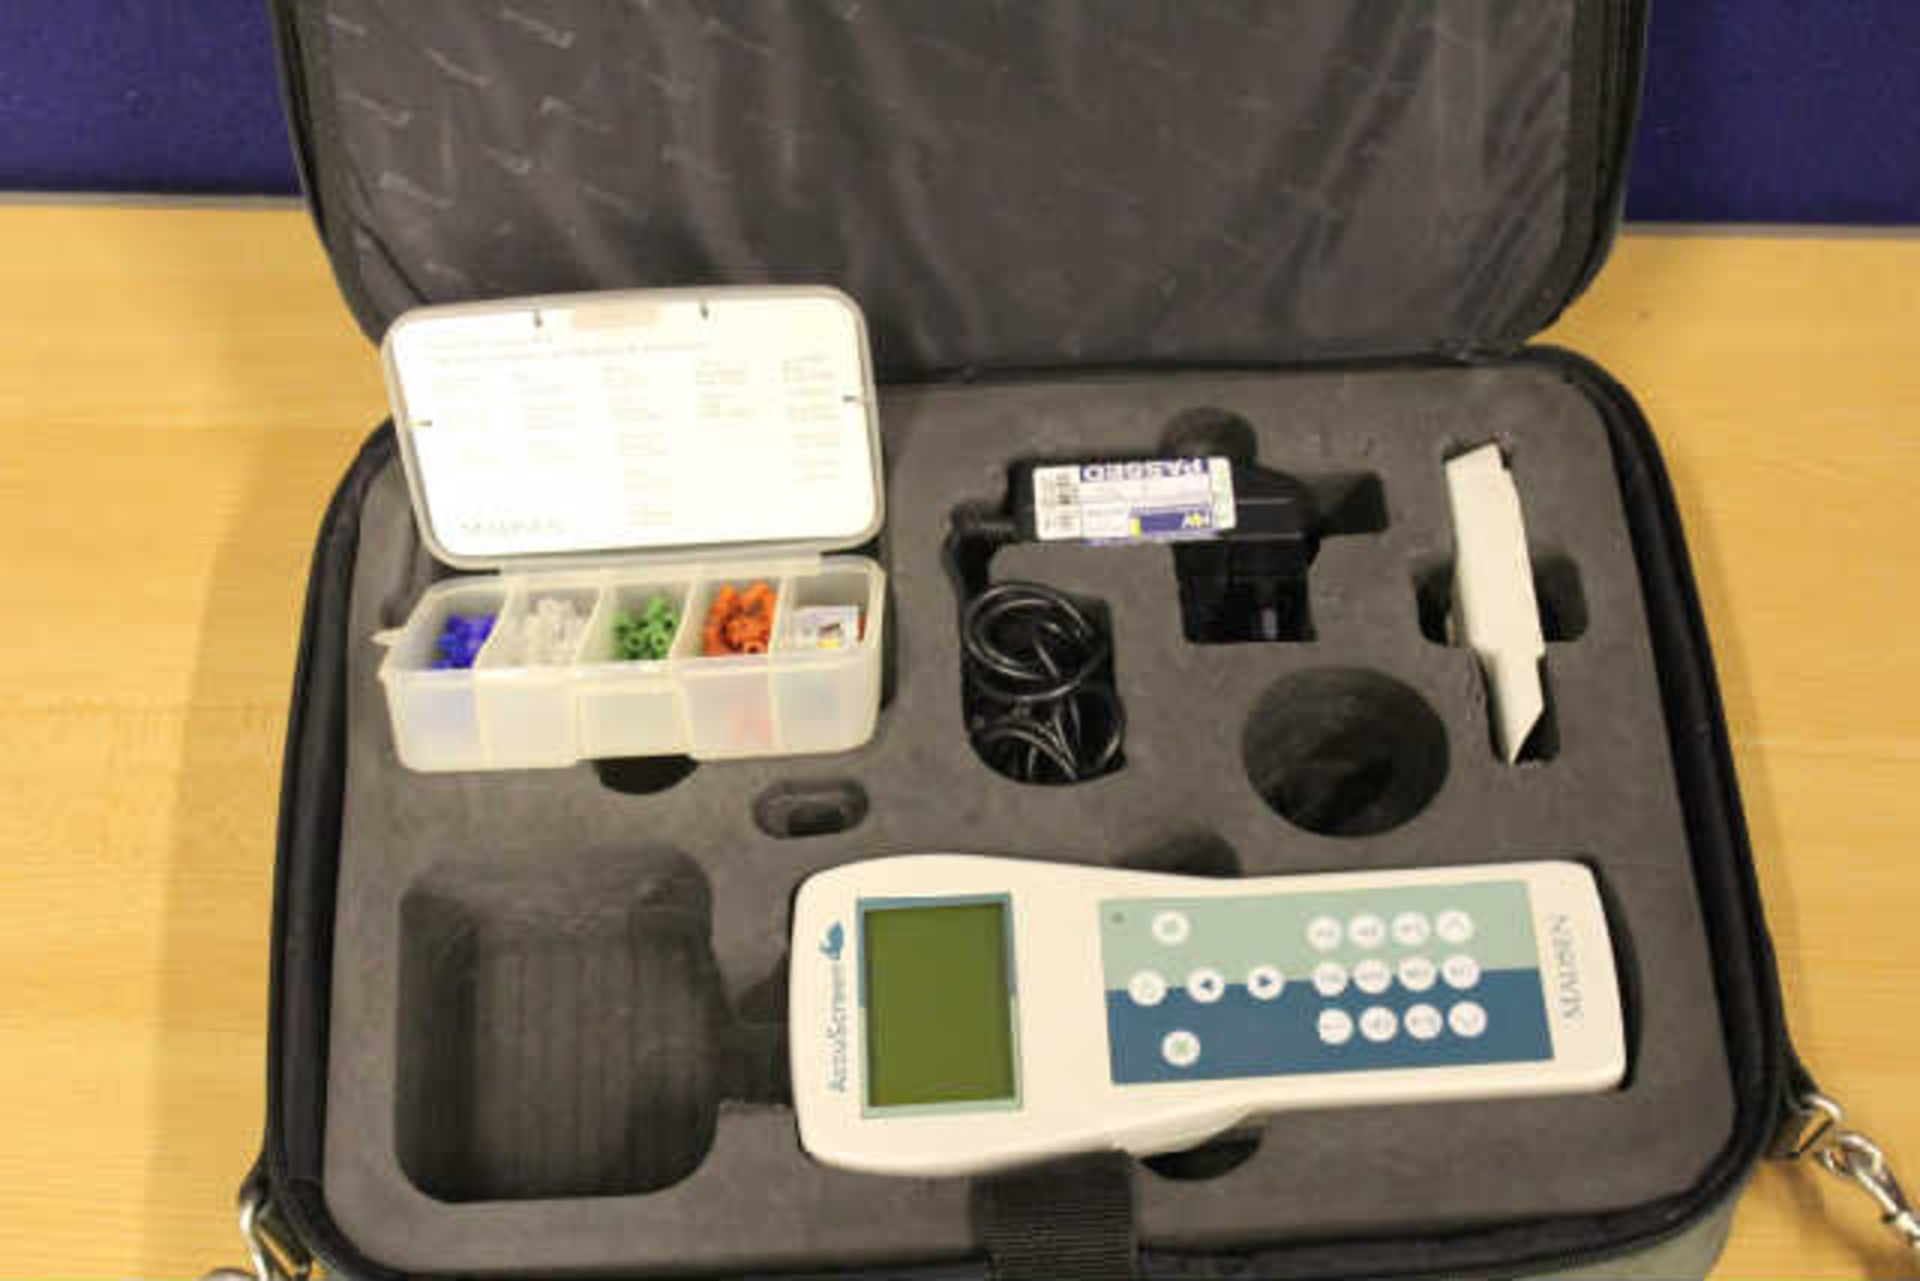 MADSEN ACCUSCREEN PRO NEONATAL RELEX MONITOR WITH PROB ACCESSORY KIT AND CARRY CASE(COMES WITH PLUG,